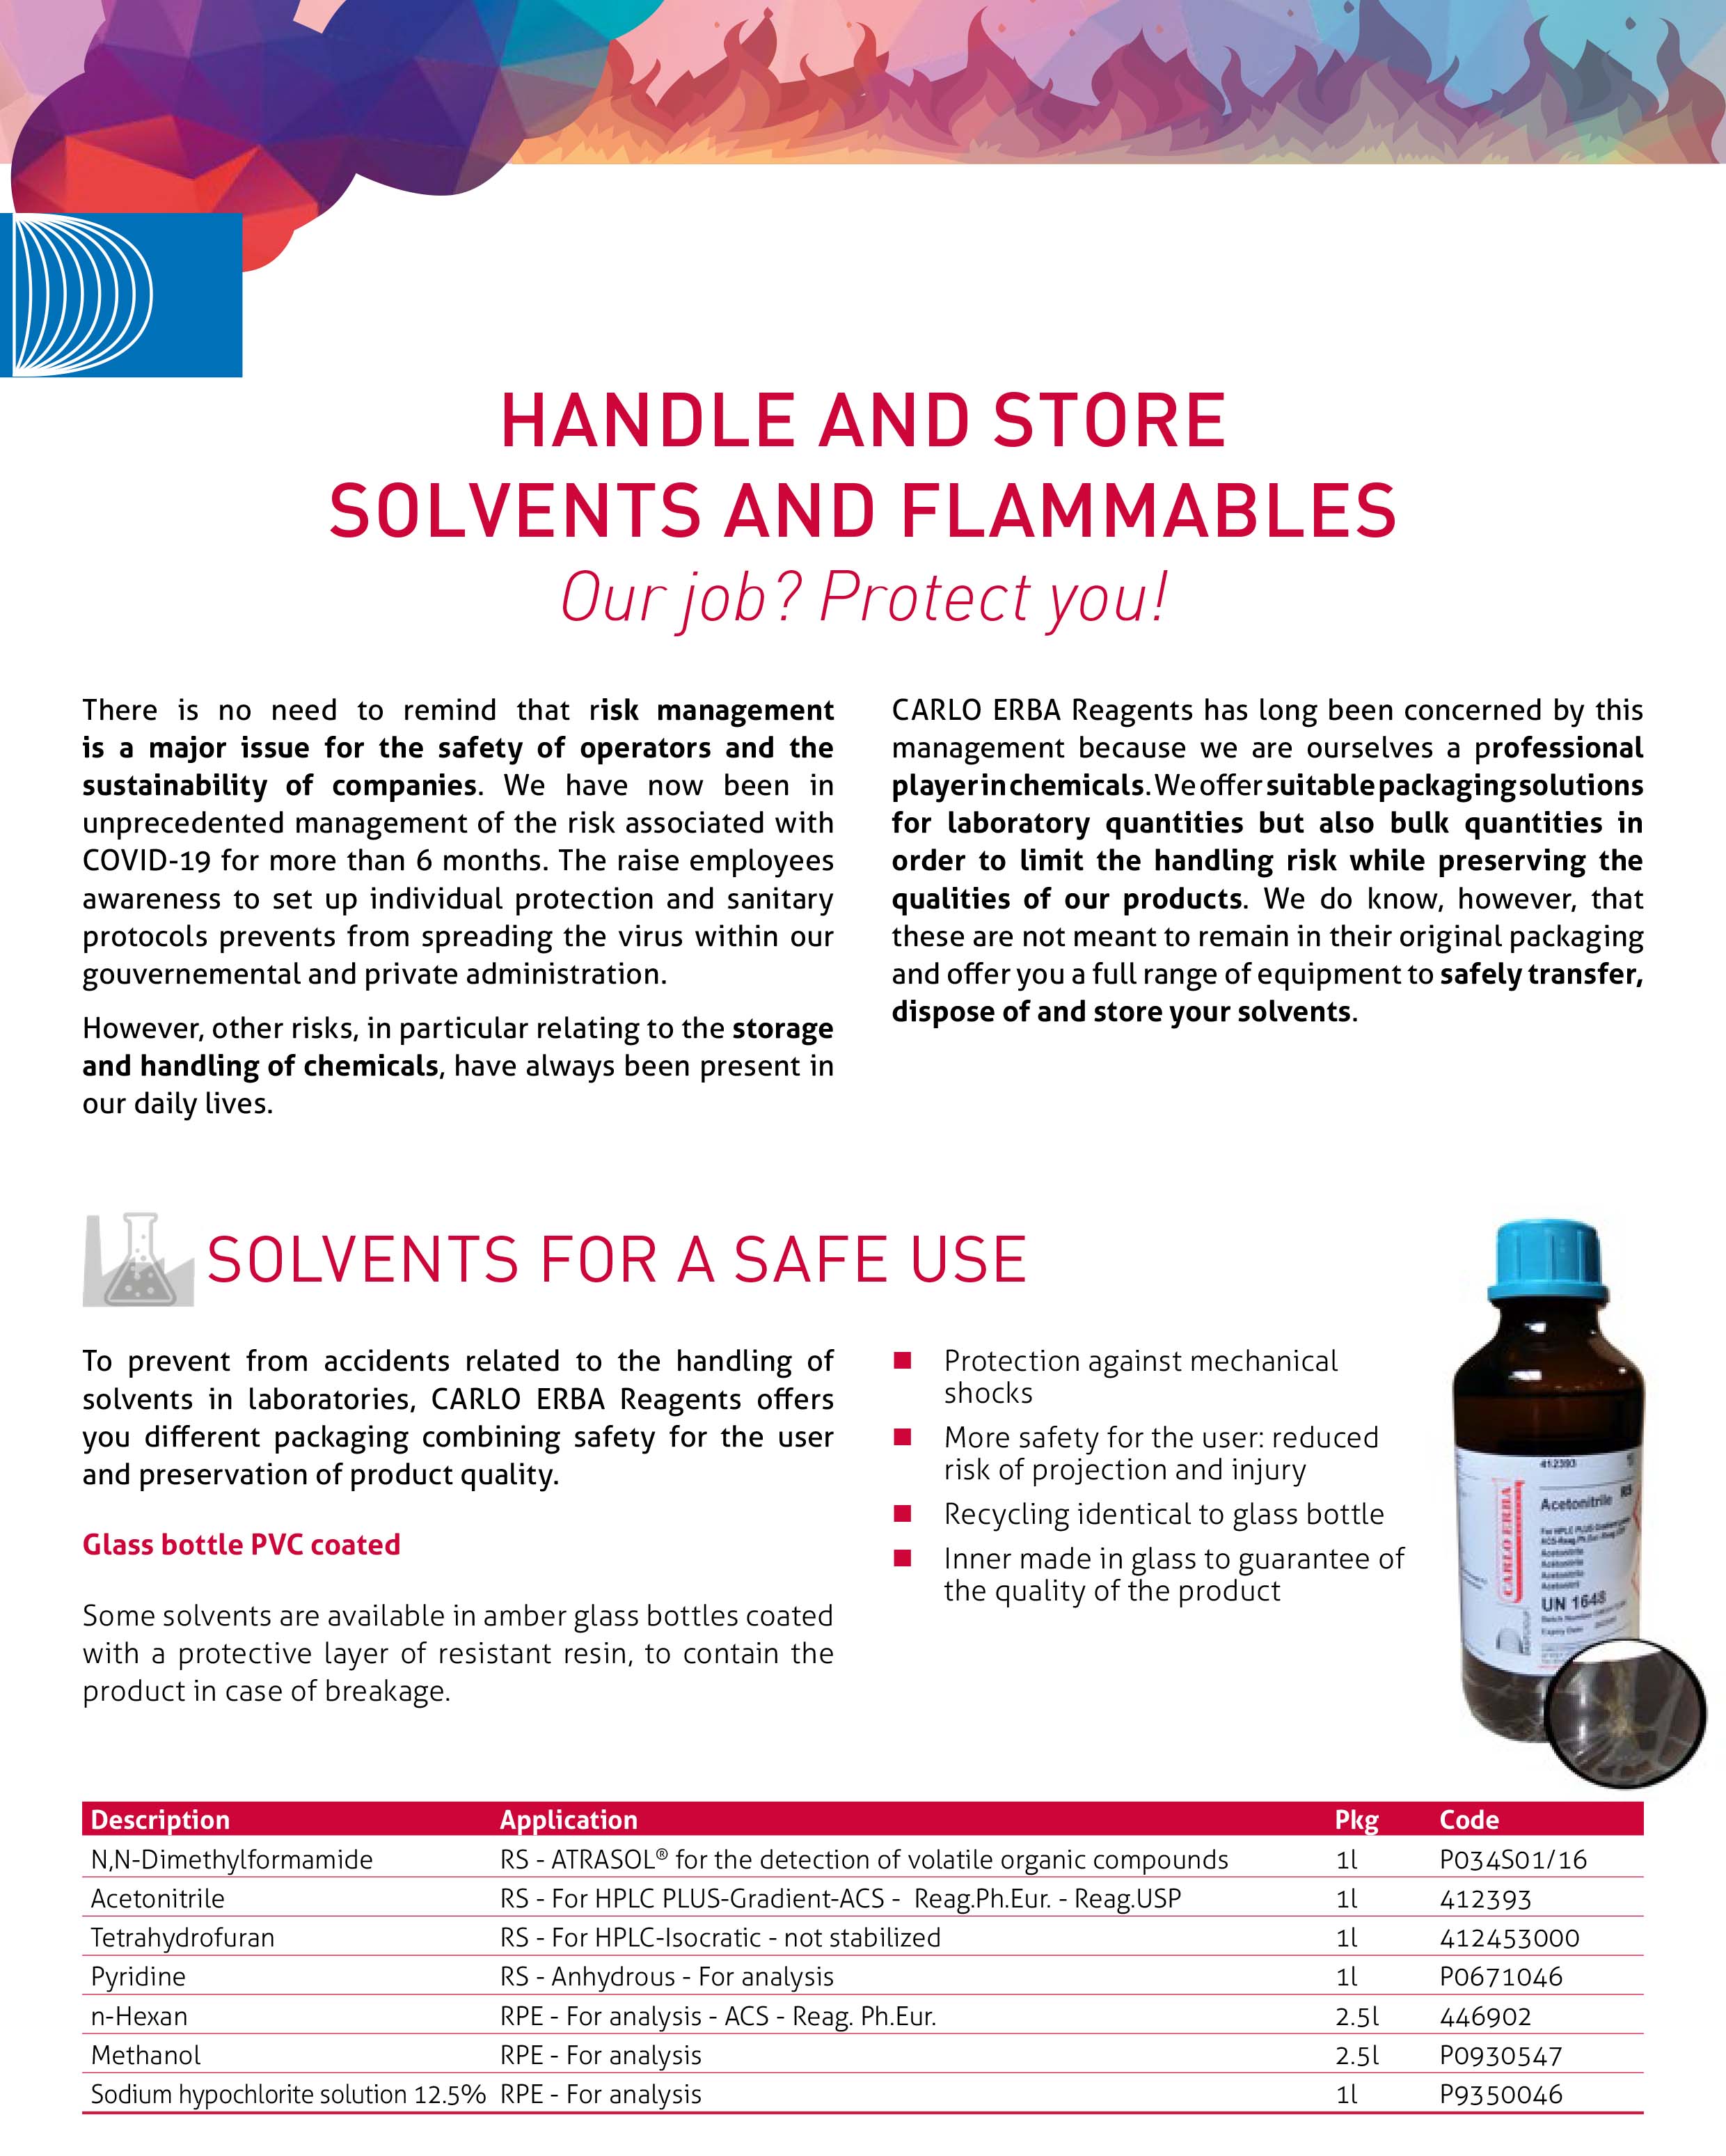 Handle and store solvents and flammables